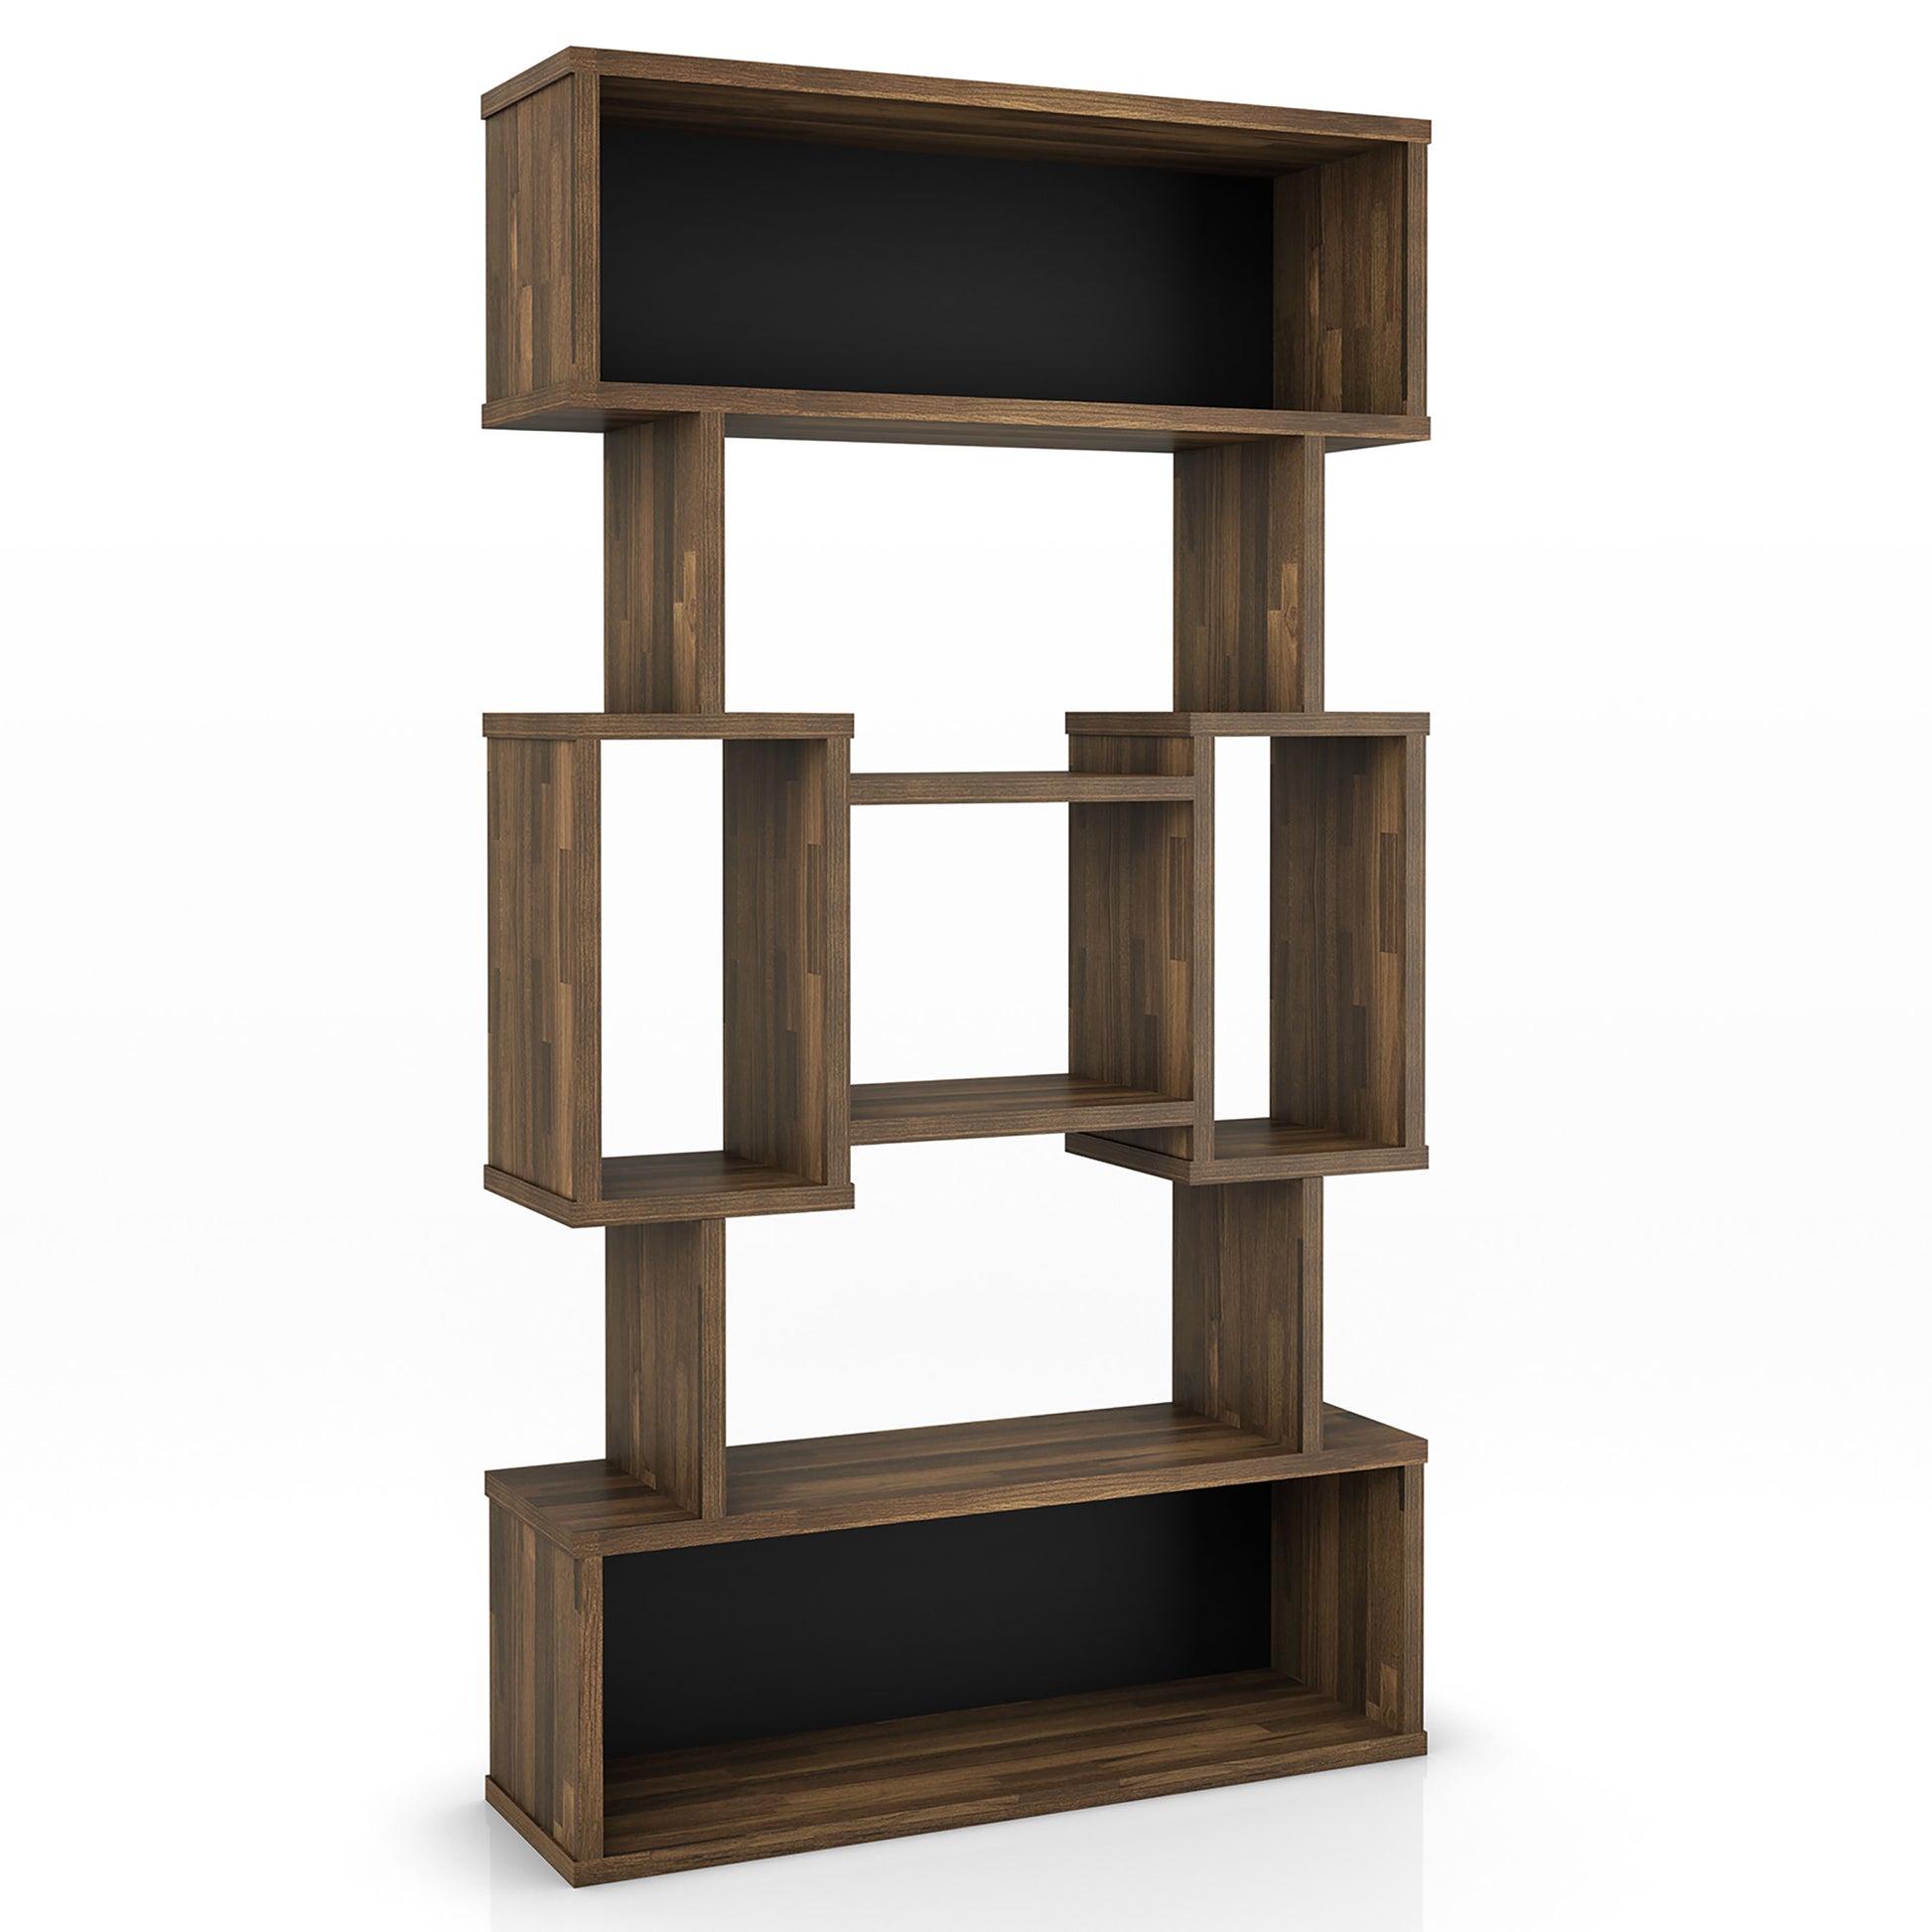 Right angled modern light hickory open cubic bookcase display shelf on a white background